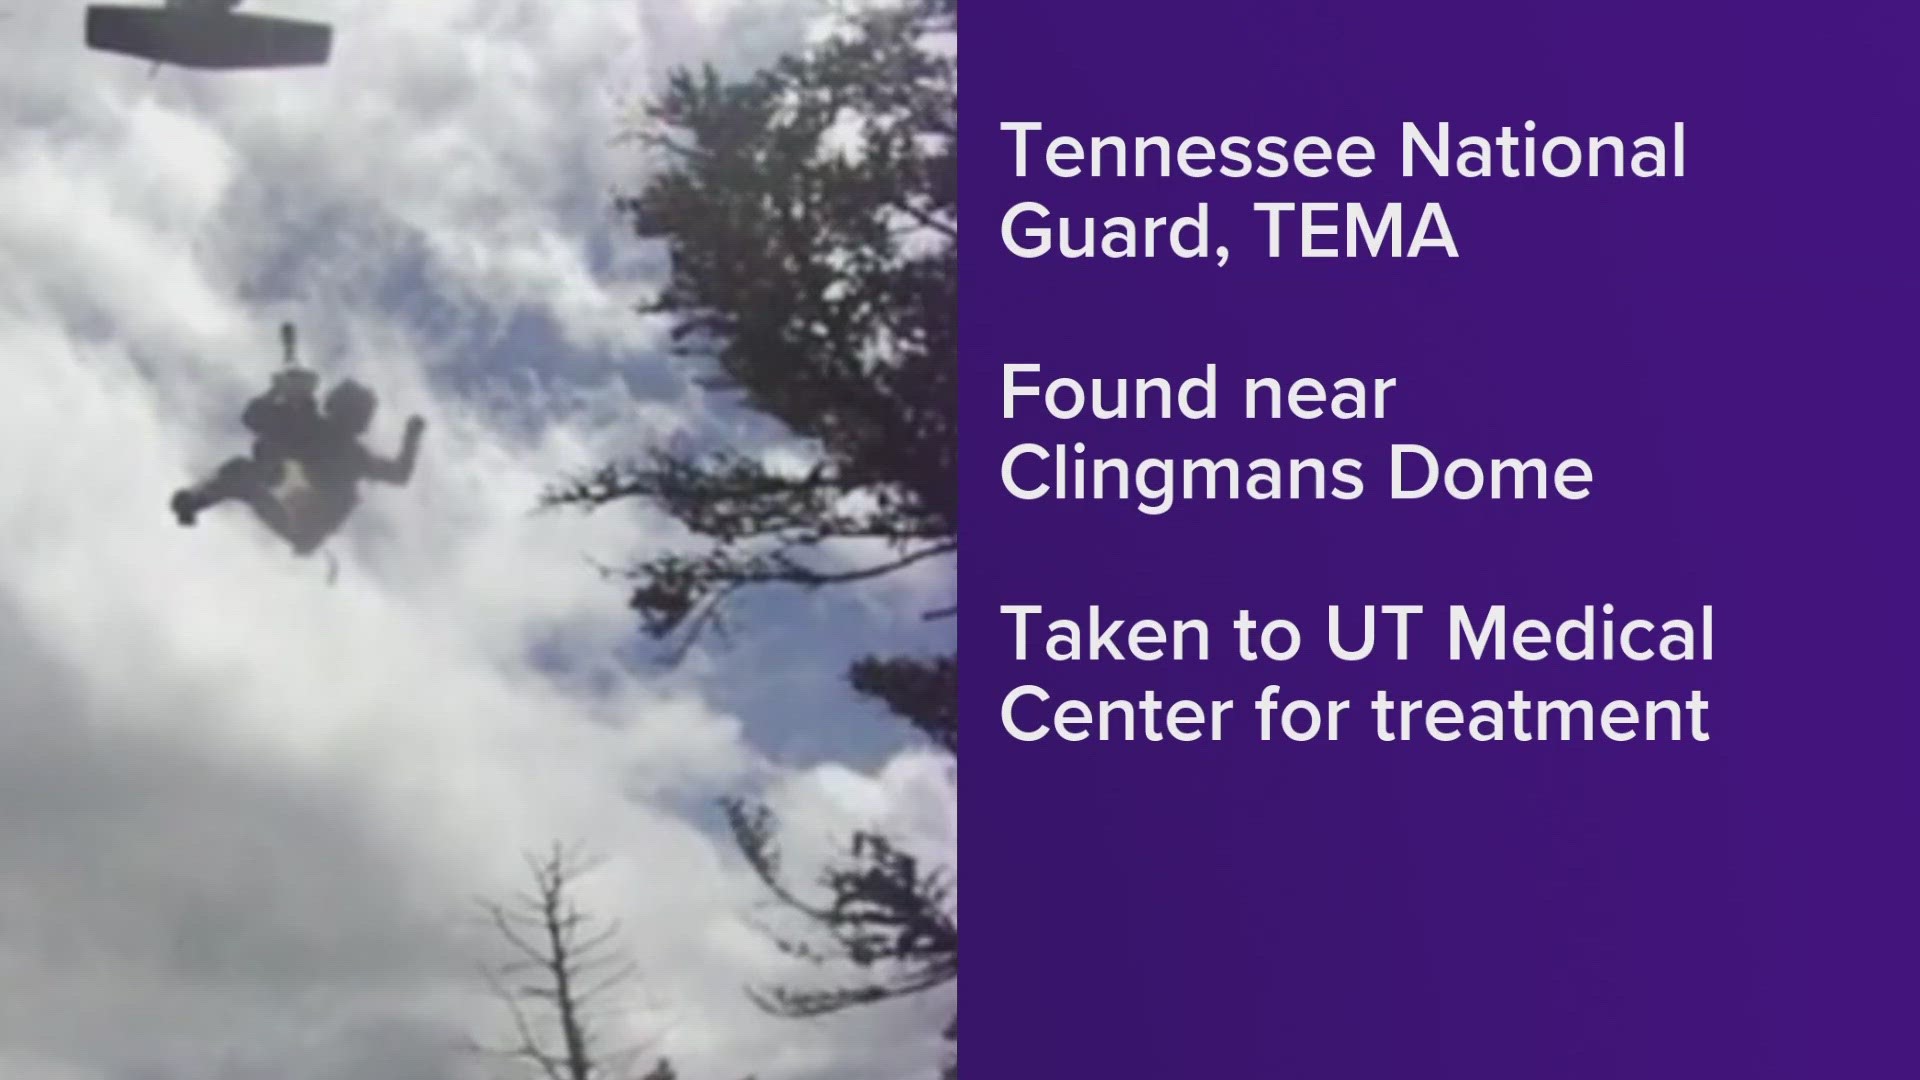 The hiker was in a remote area of the Great Smoky Mountains National Park, roughly 1.5 miles west of Clingmans Dome, the National Guard said.